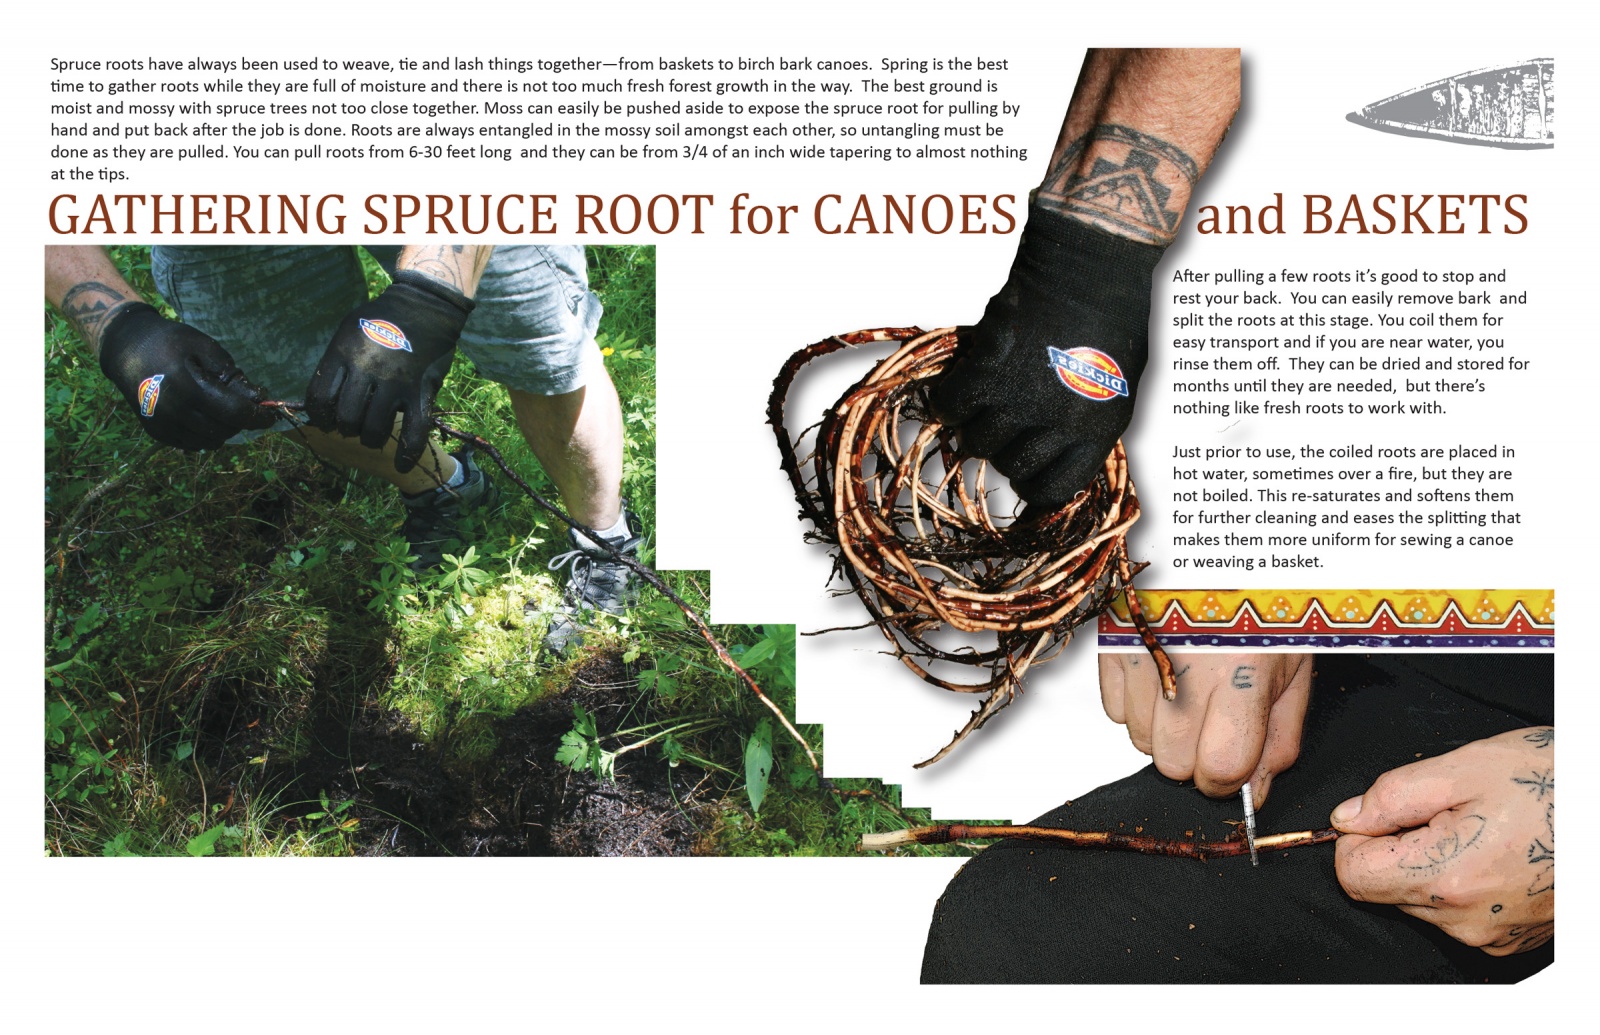 Gathering Spruce Root for Canoes and Baskets